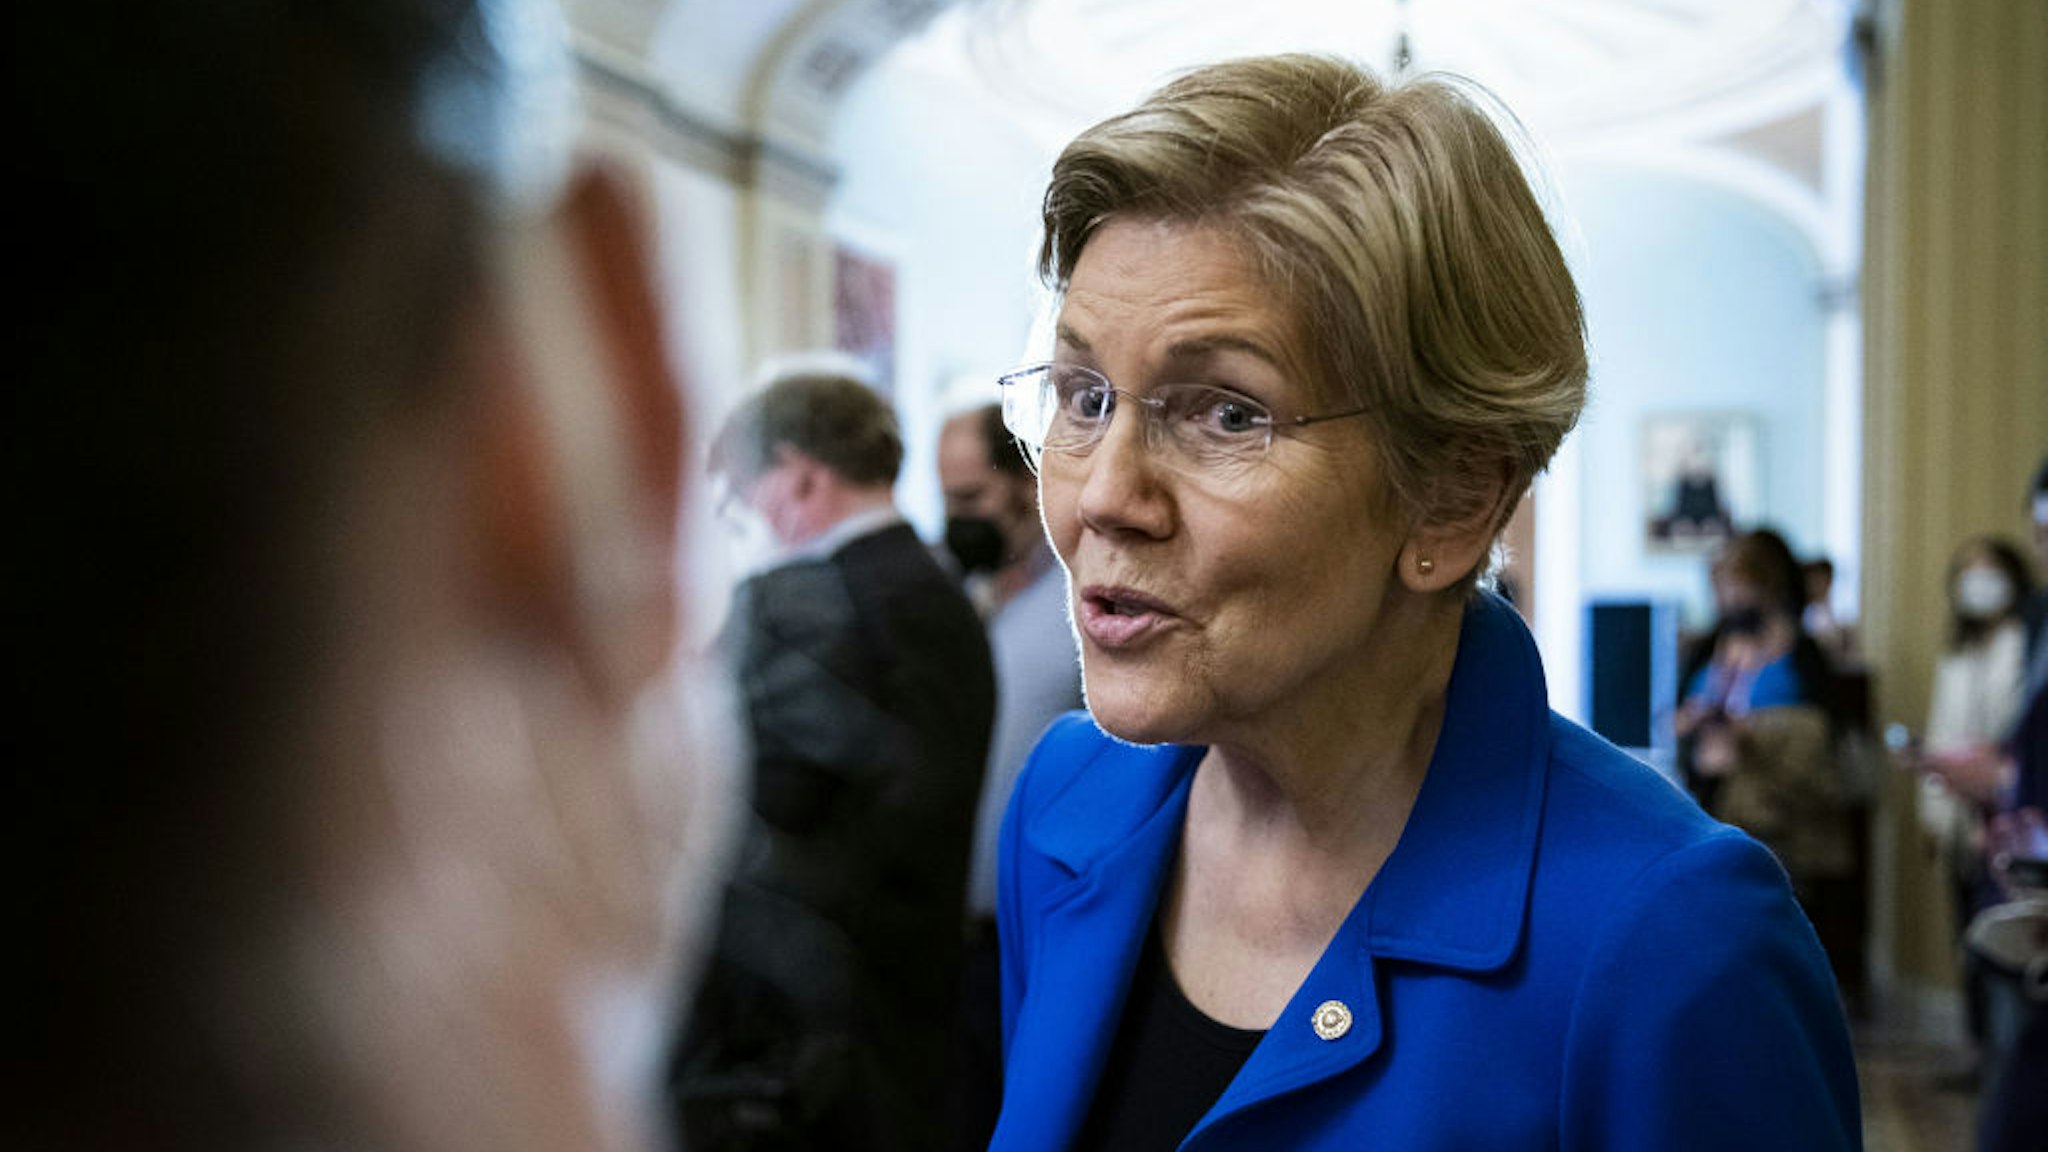 Senator Elizabeth Warren, a Democrat from Massachusetts, speaks with members of the media following the Senate Democrats policy luncheon at the U.S. Capitol in Washington, D.C., U.S., on Tuesday, March 8, 2022.